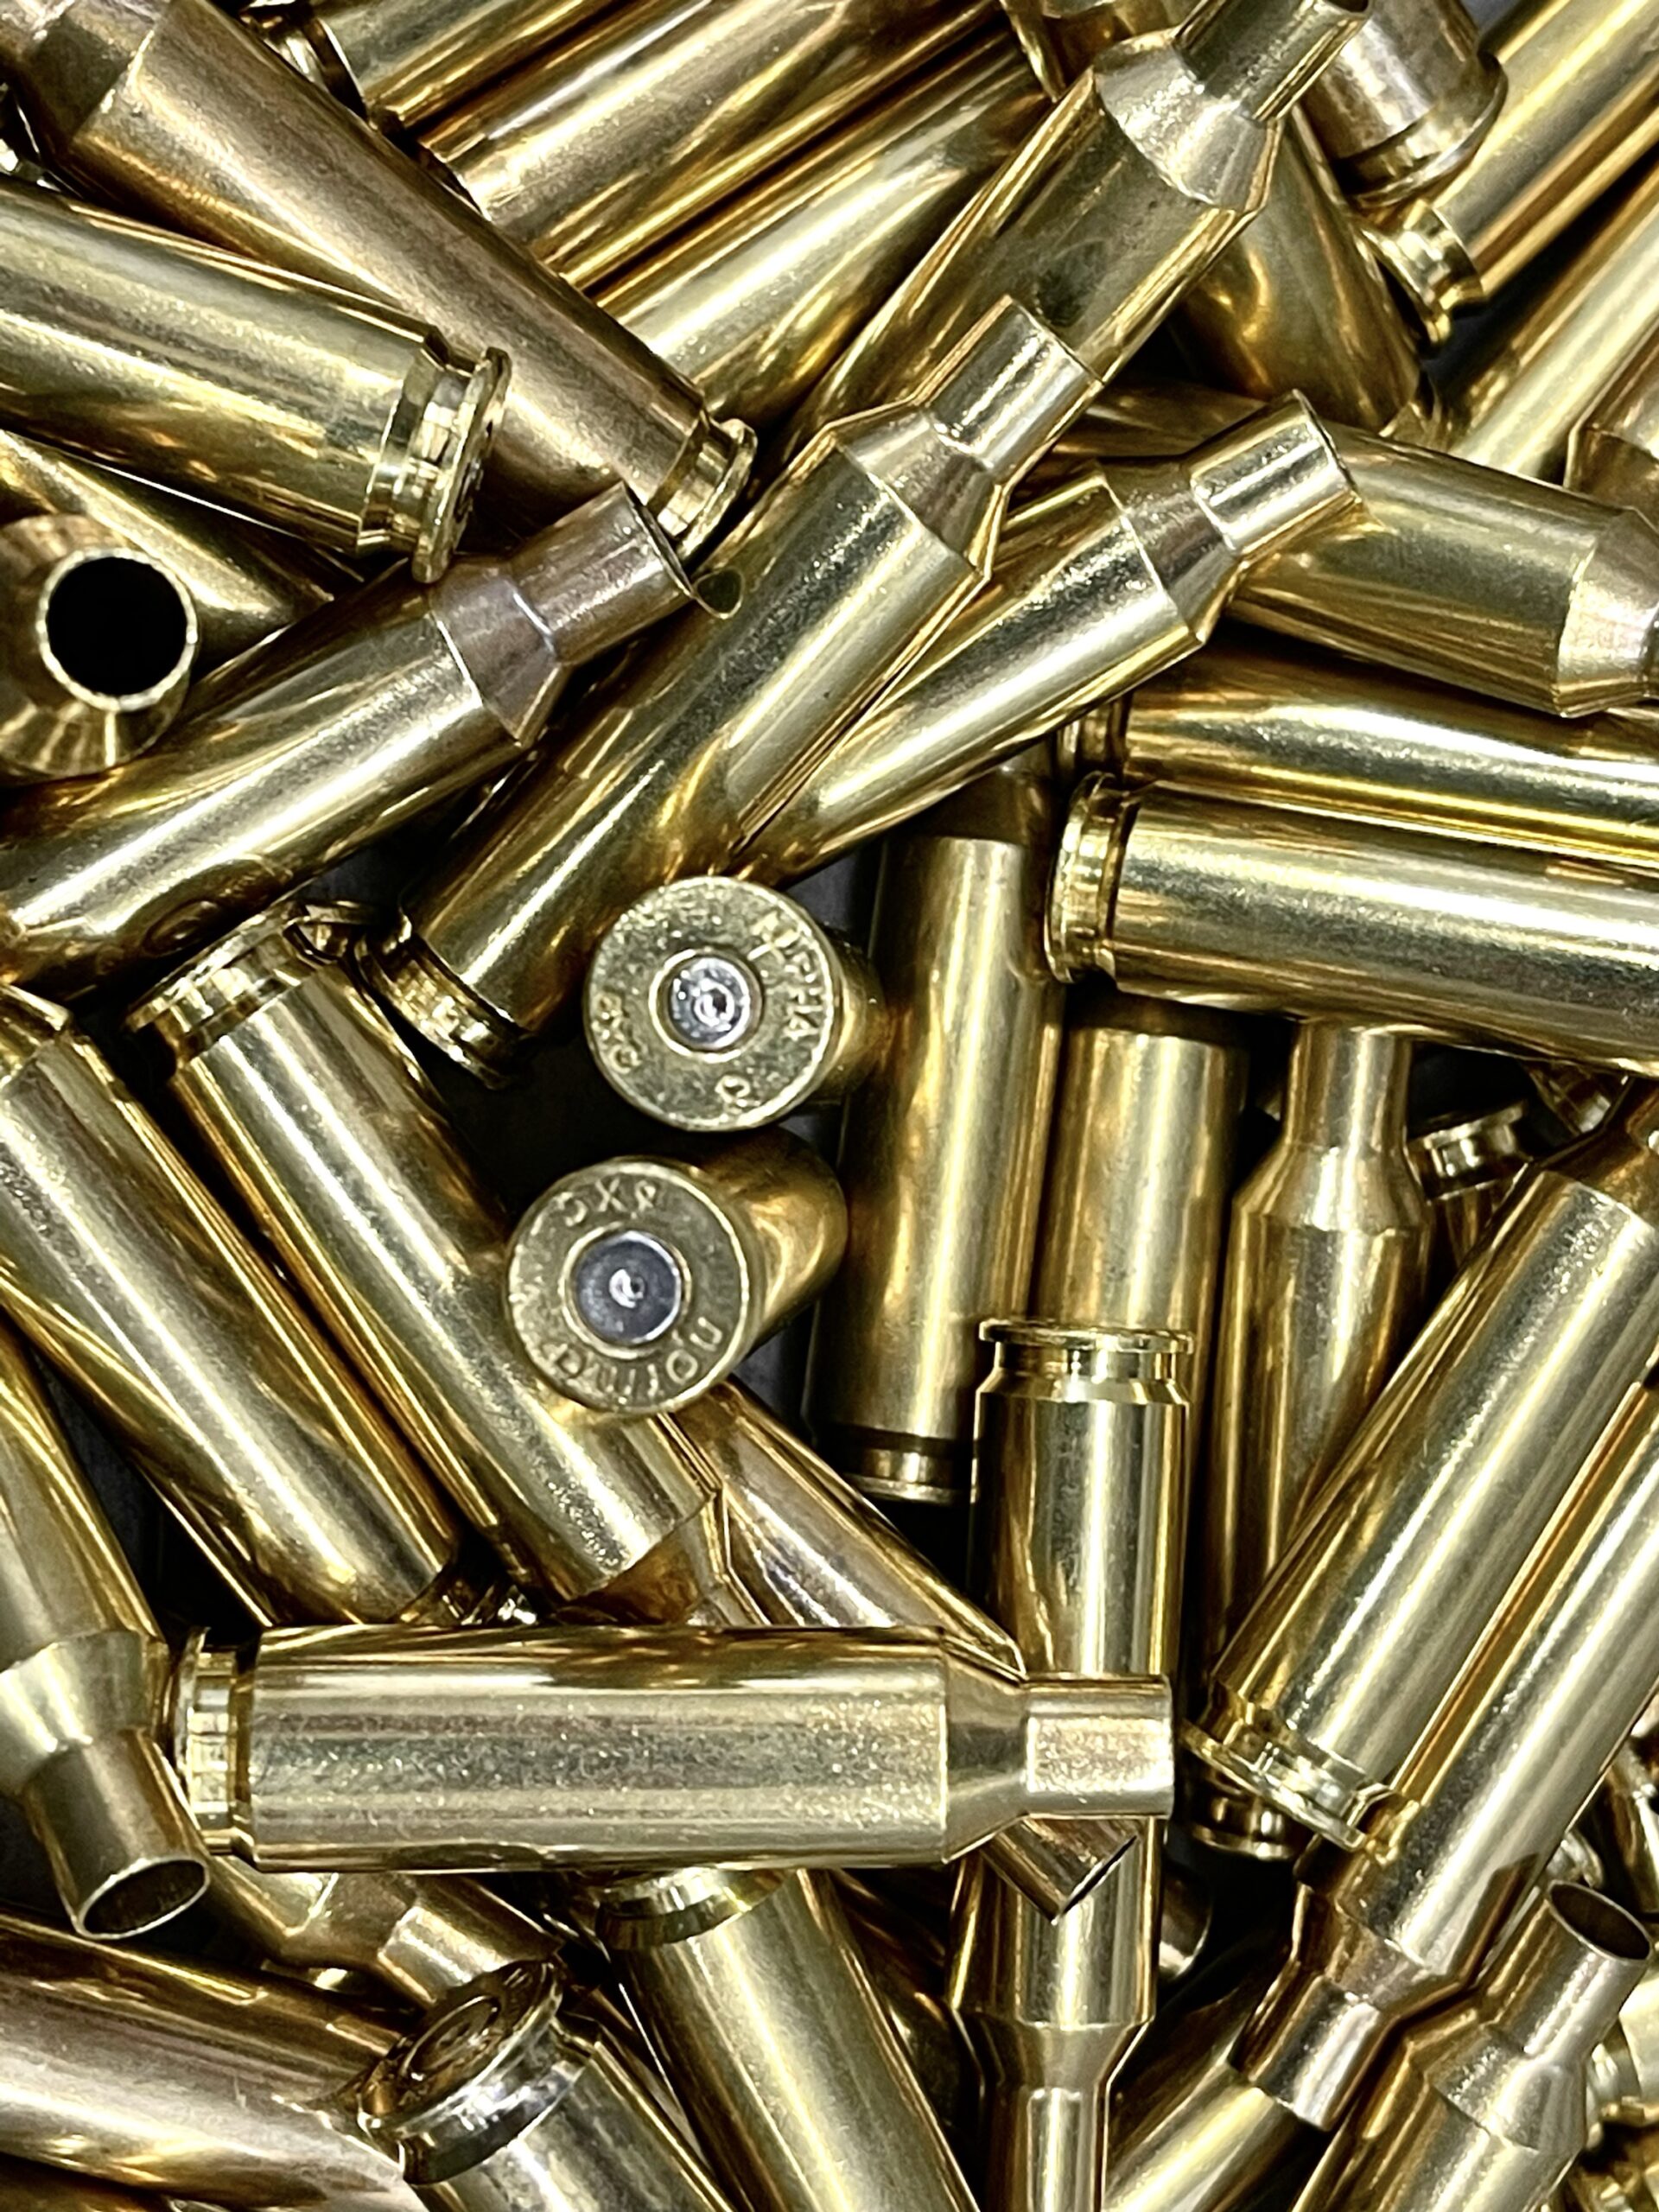 once fired 30 super carry brass for reloading in stock free shipping